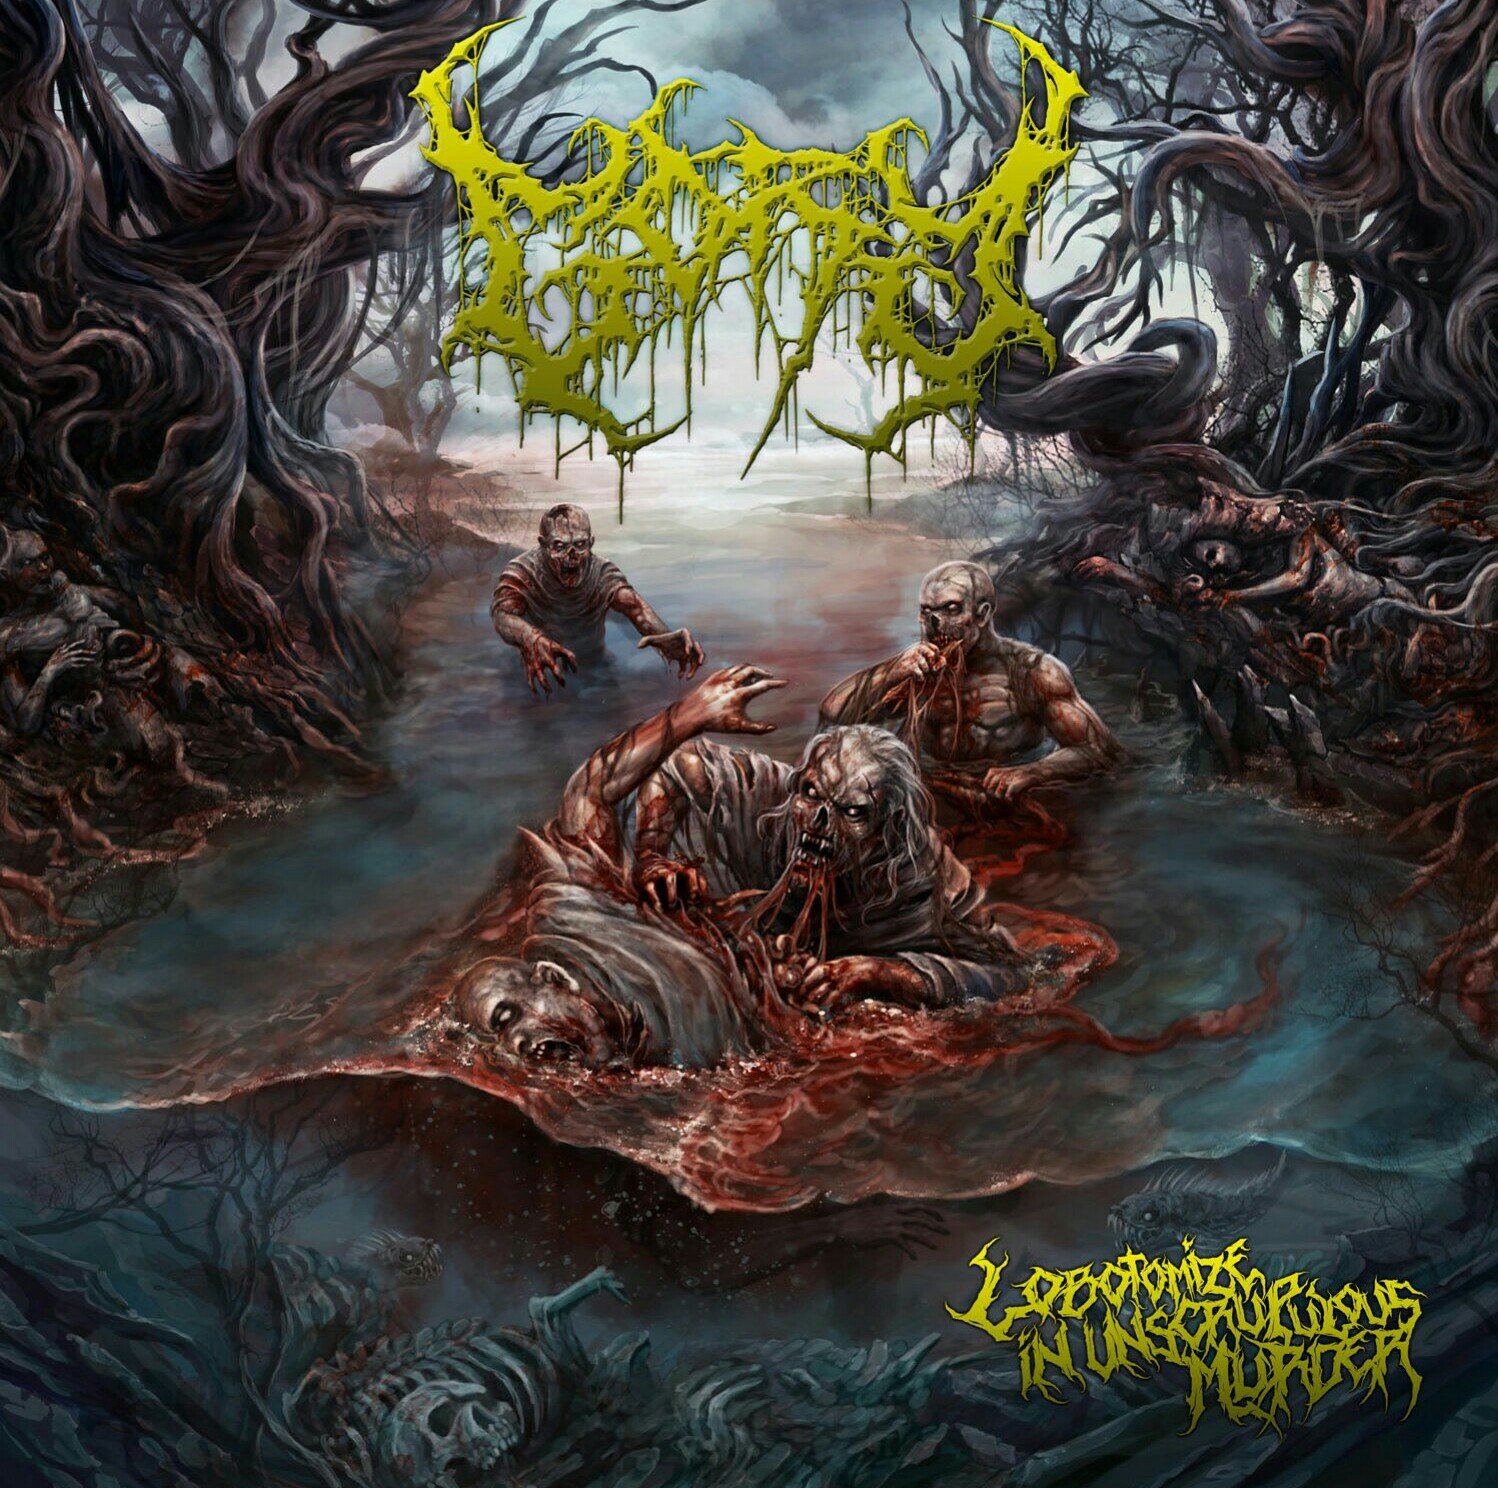 Gory - Lobotomize in Unscrupulous Murder (2019) FLAC Download